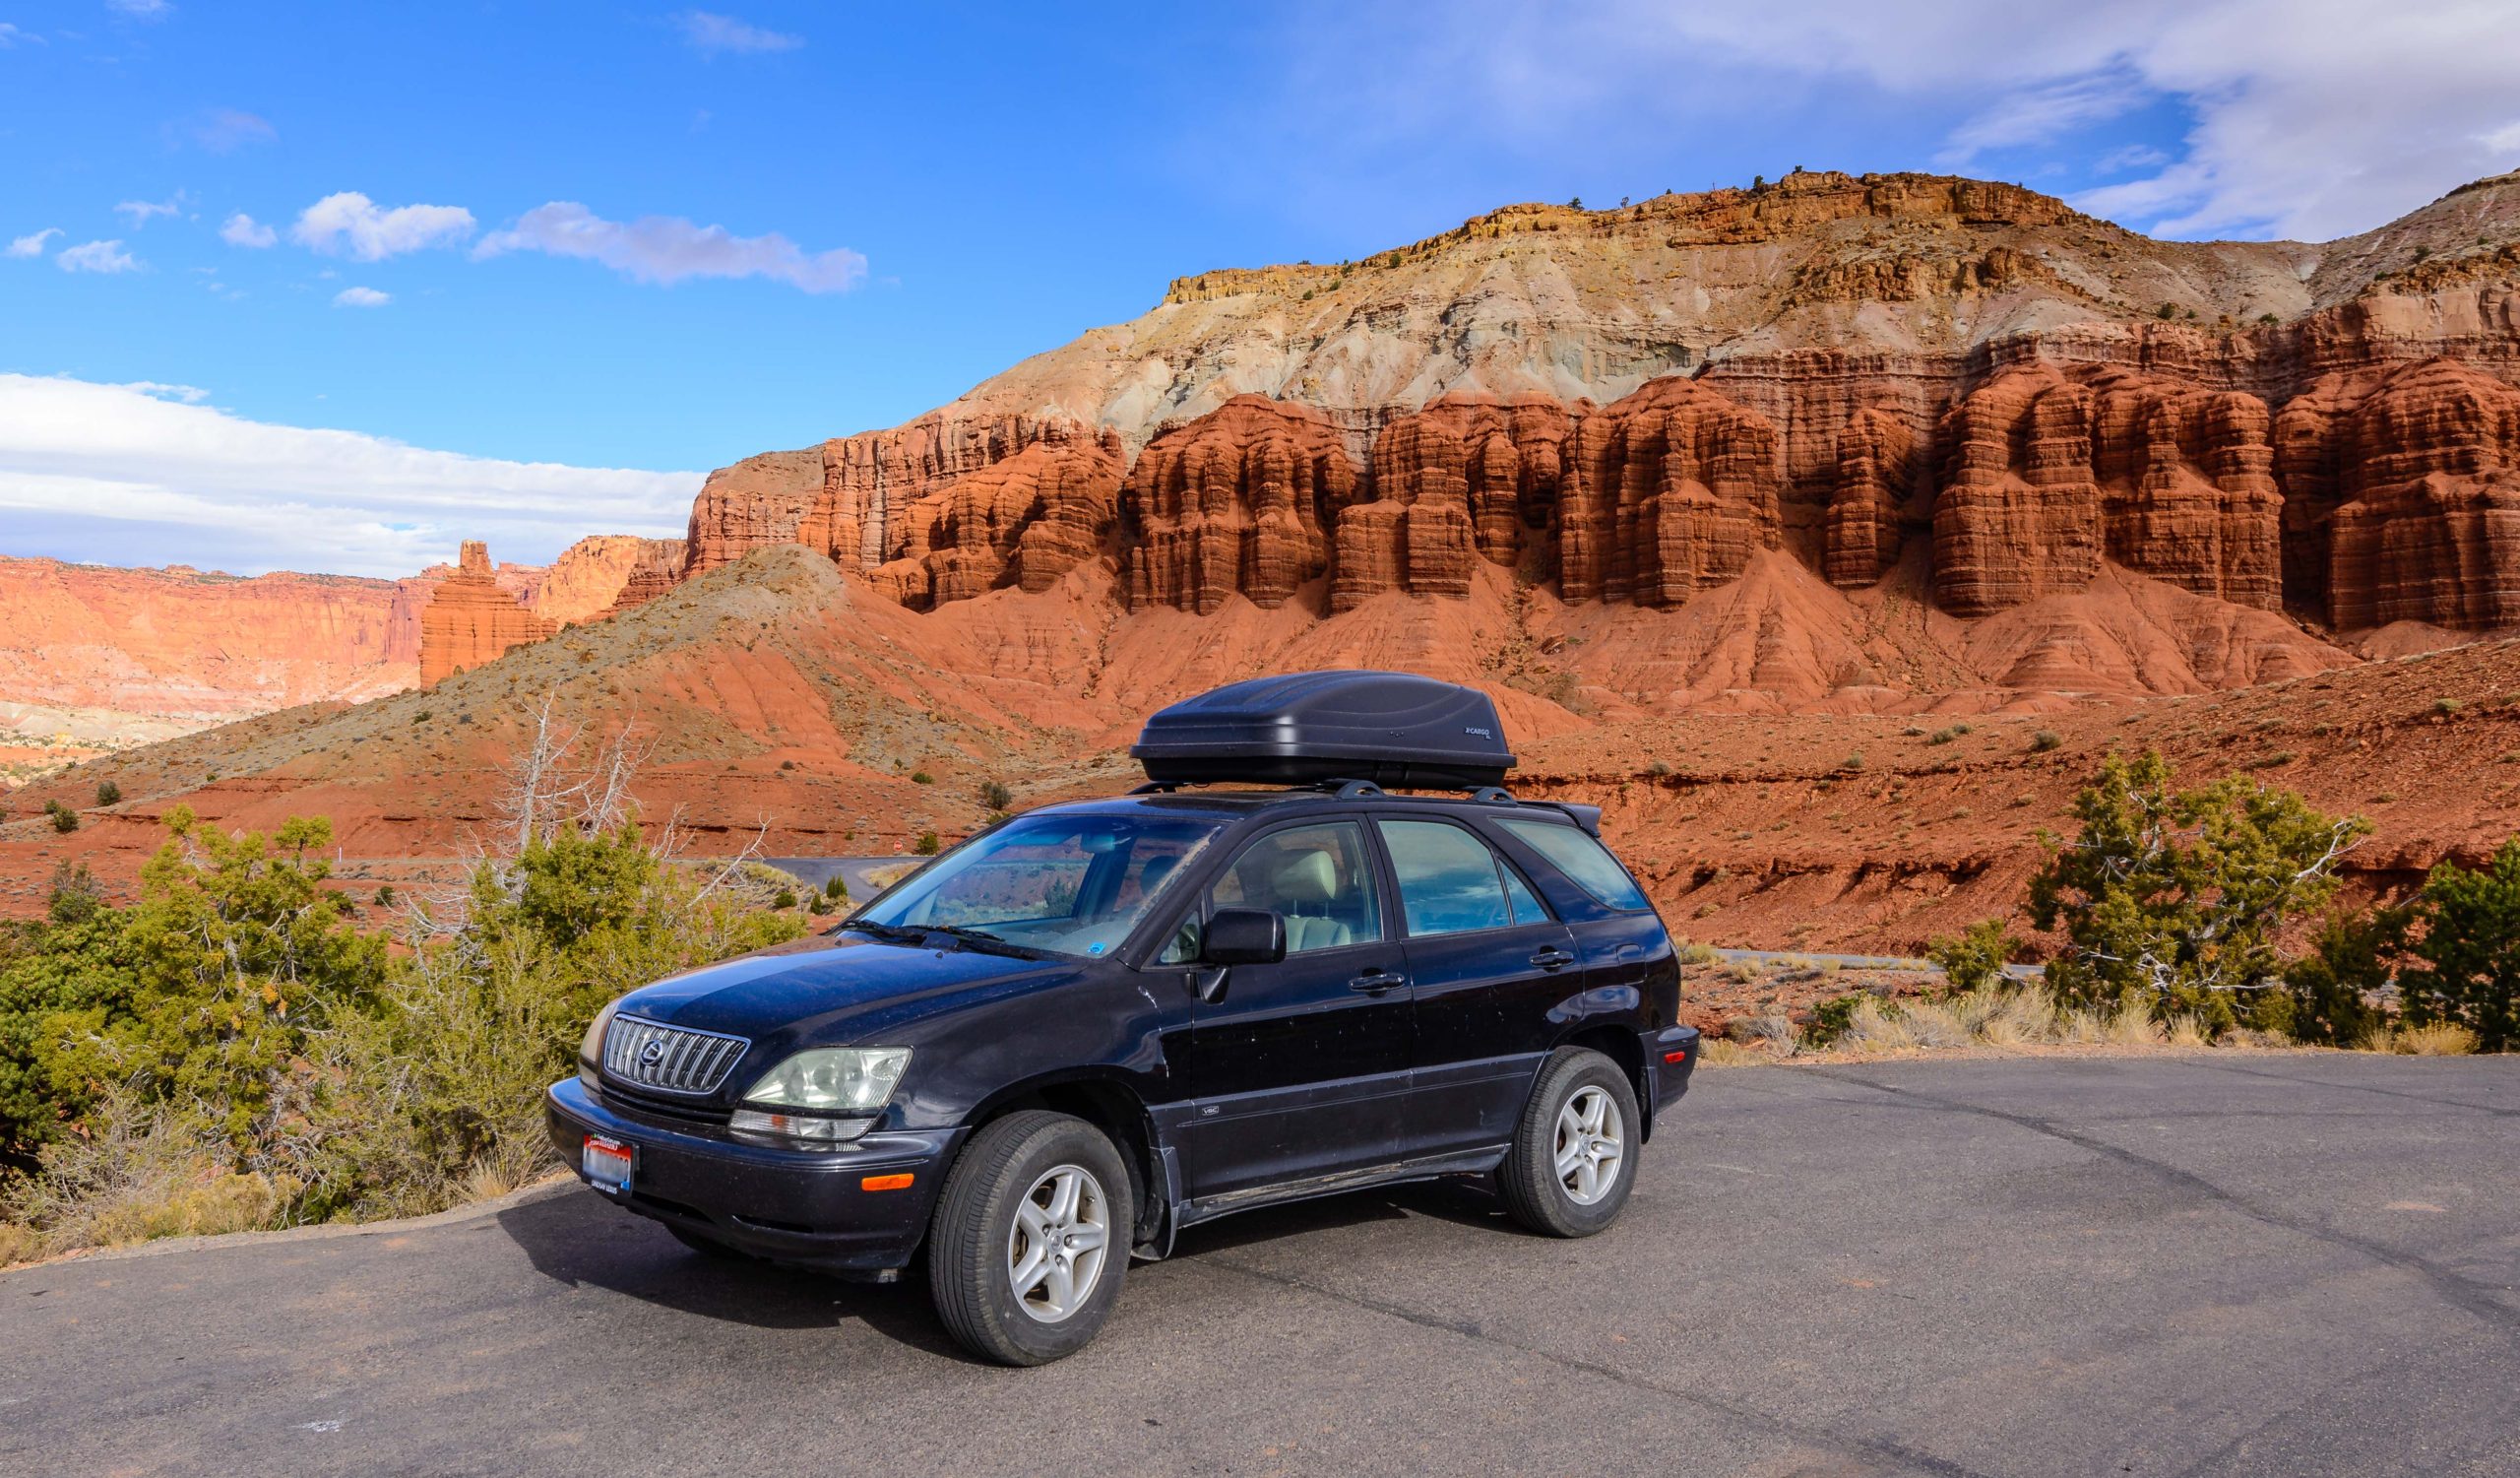 How to travel during COVID-19: Planning a safe road trip